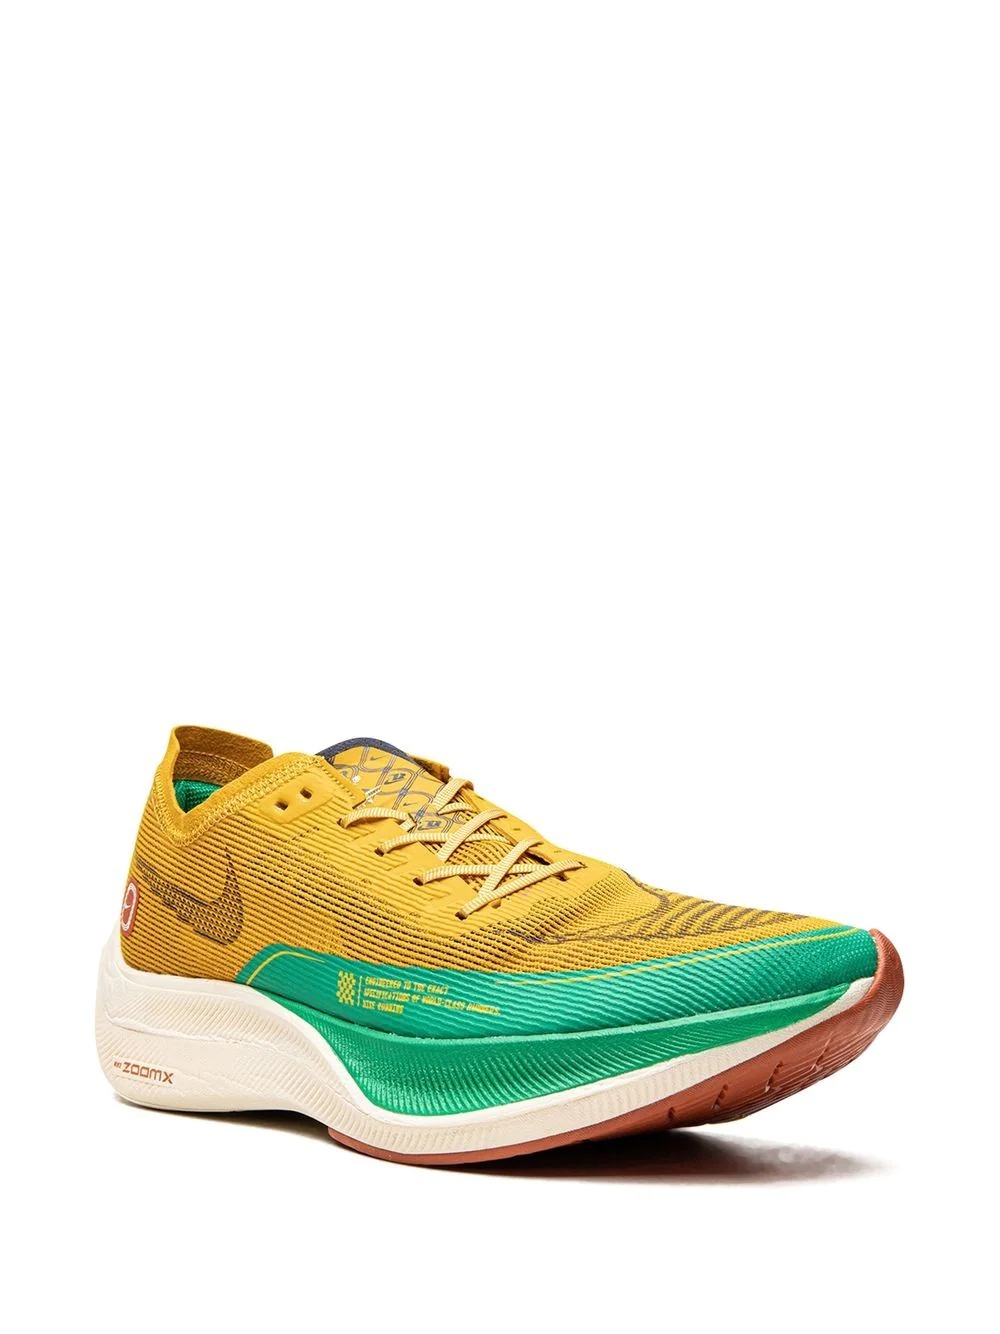 ZoomX Vaporfly Next % 2 sneakers - 2